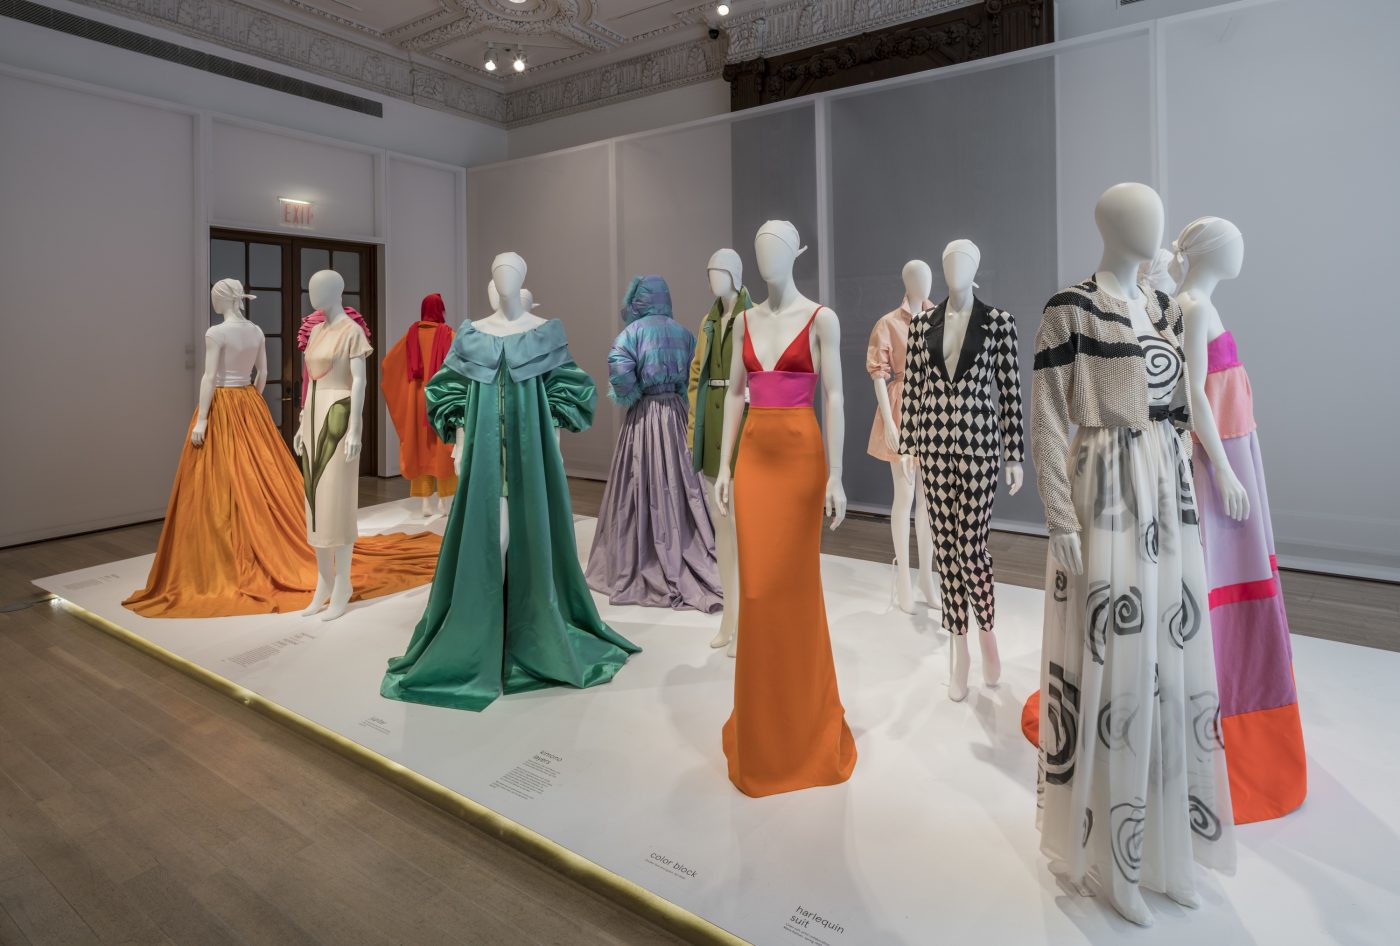 A display of several ensembles by Isaac Mizrahi at the Jewish Museum in New York